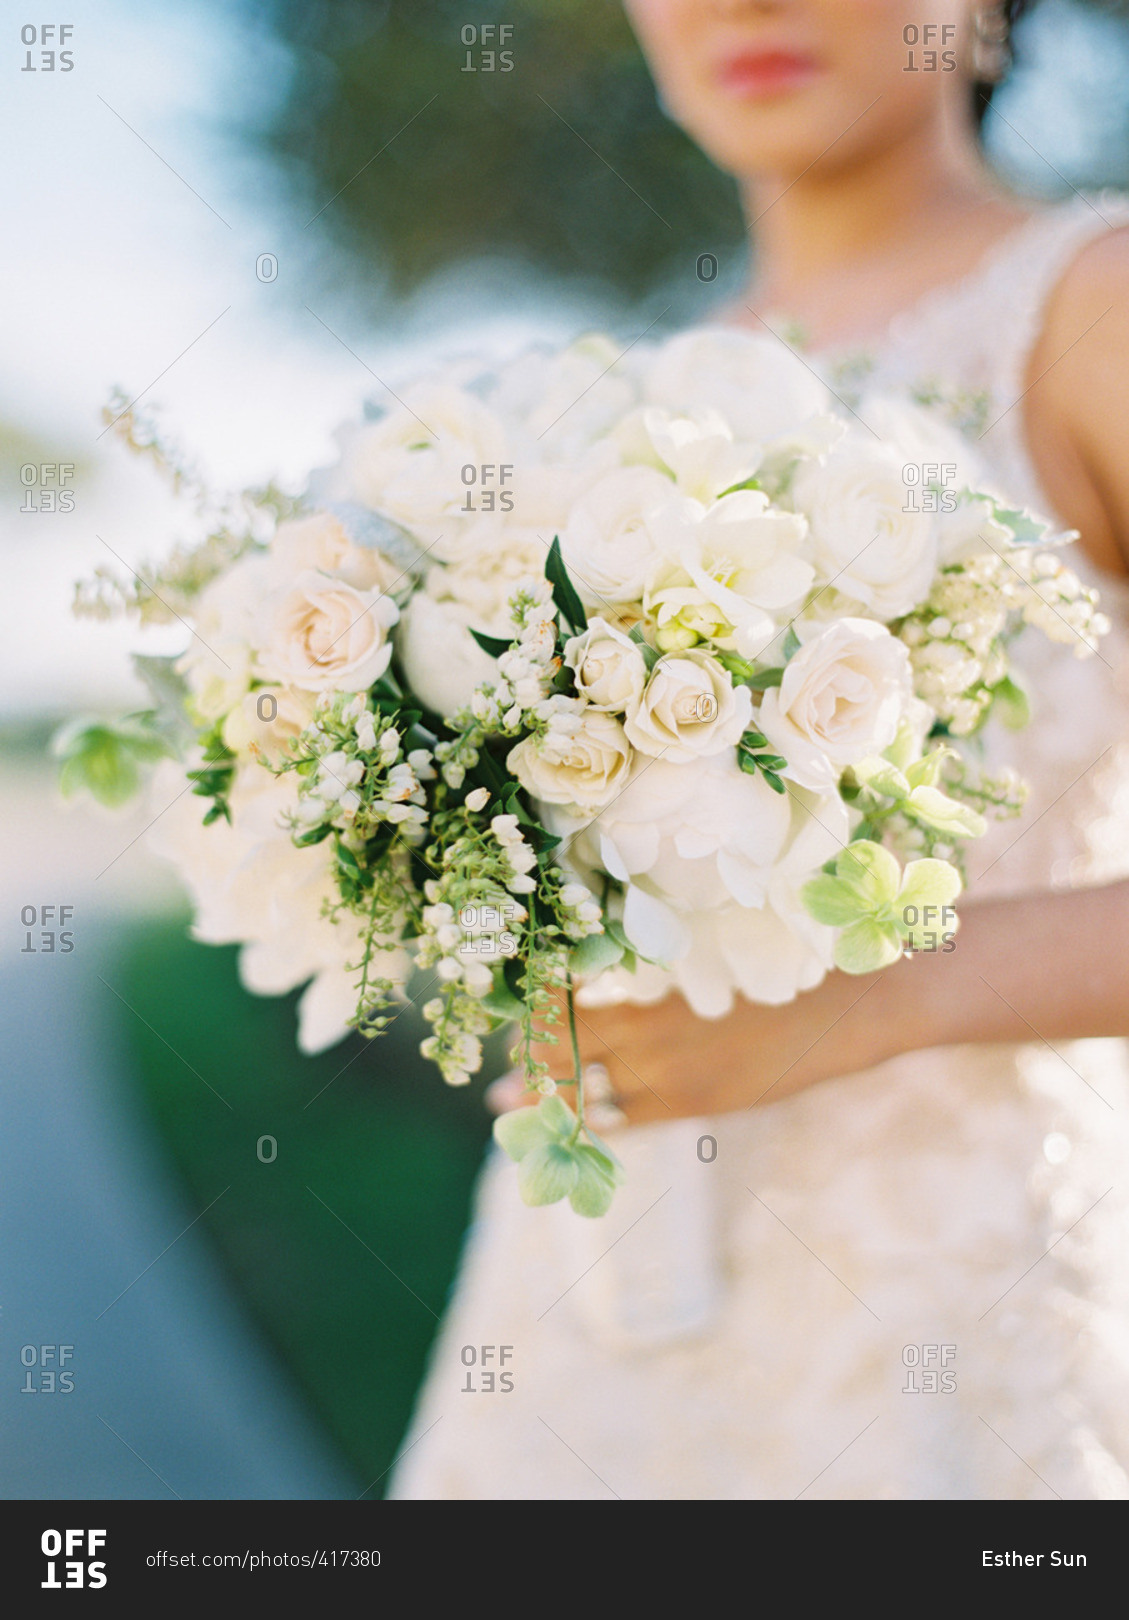 A bride holding her bouquet